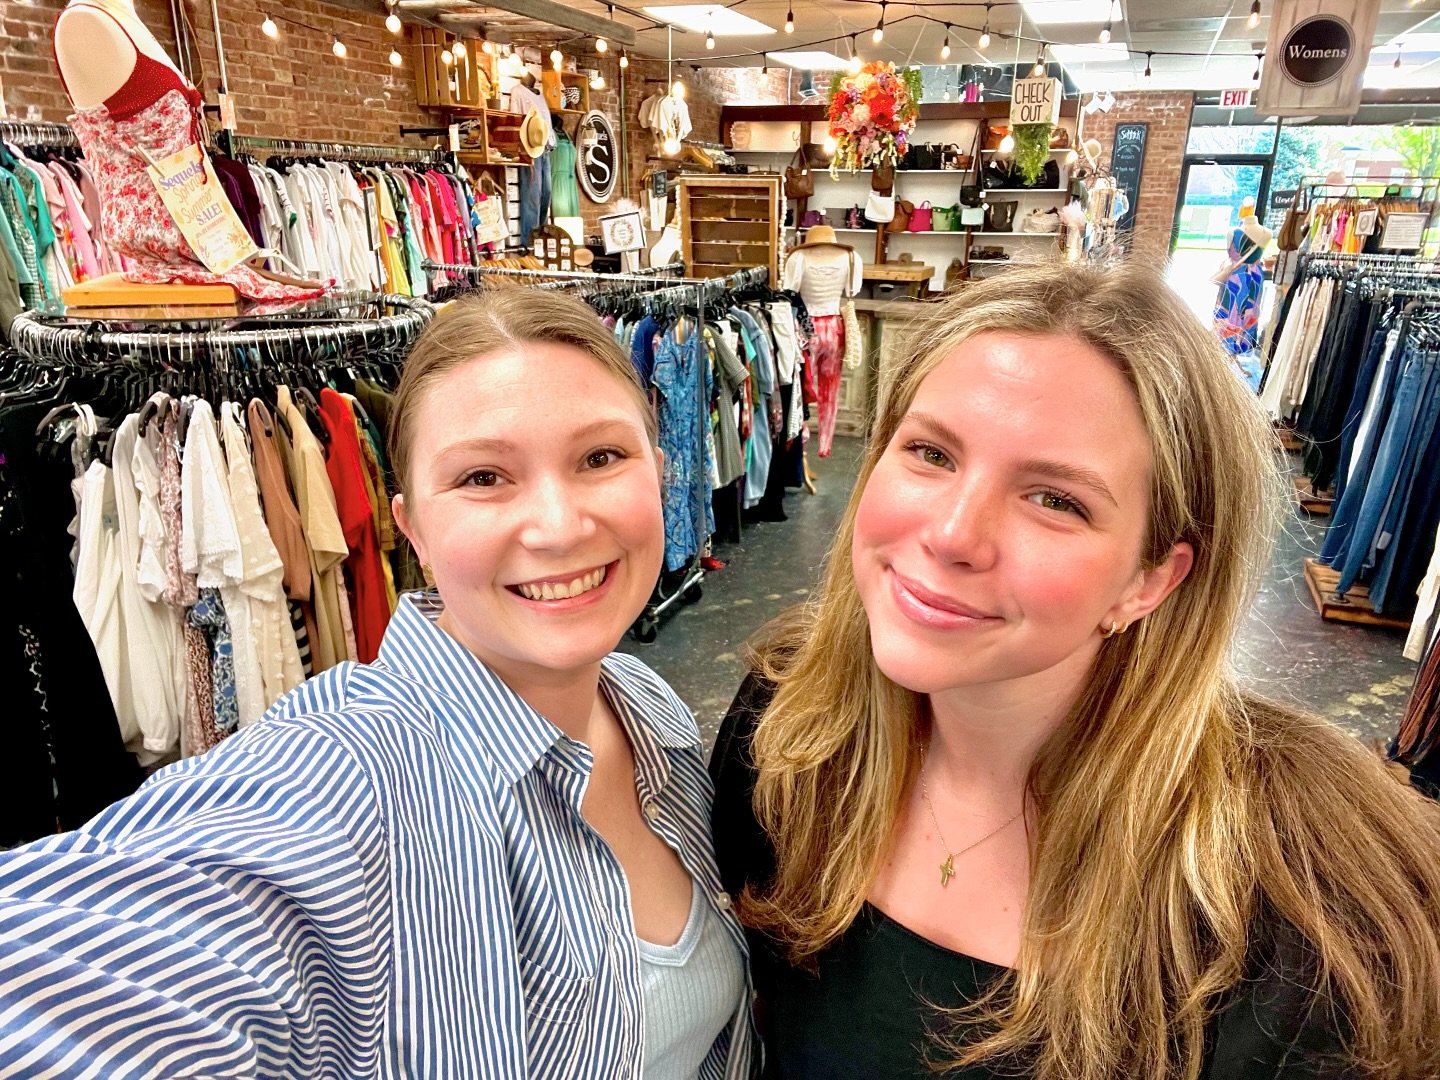 Happy Wednesday!!✨

Come visit us today and do some shopping! 🛍️We have lots of summer inventory for men, women, and kids!!☀️ Open till 6pm!